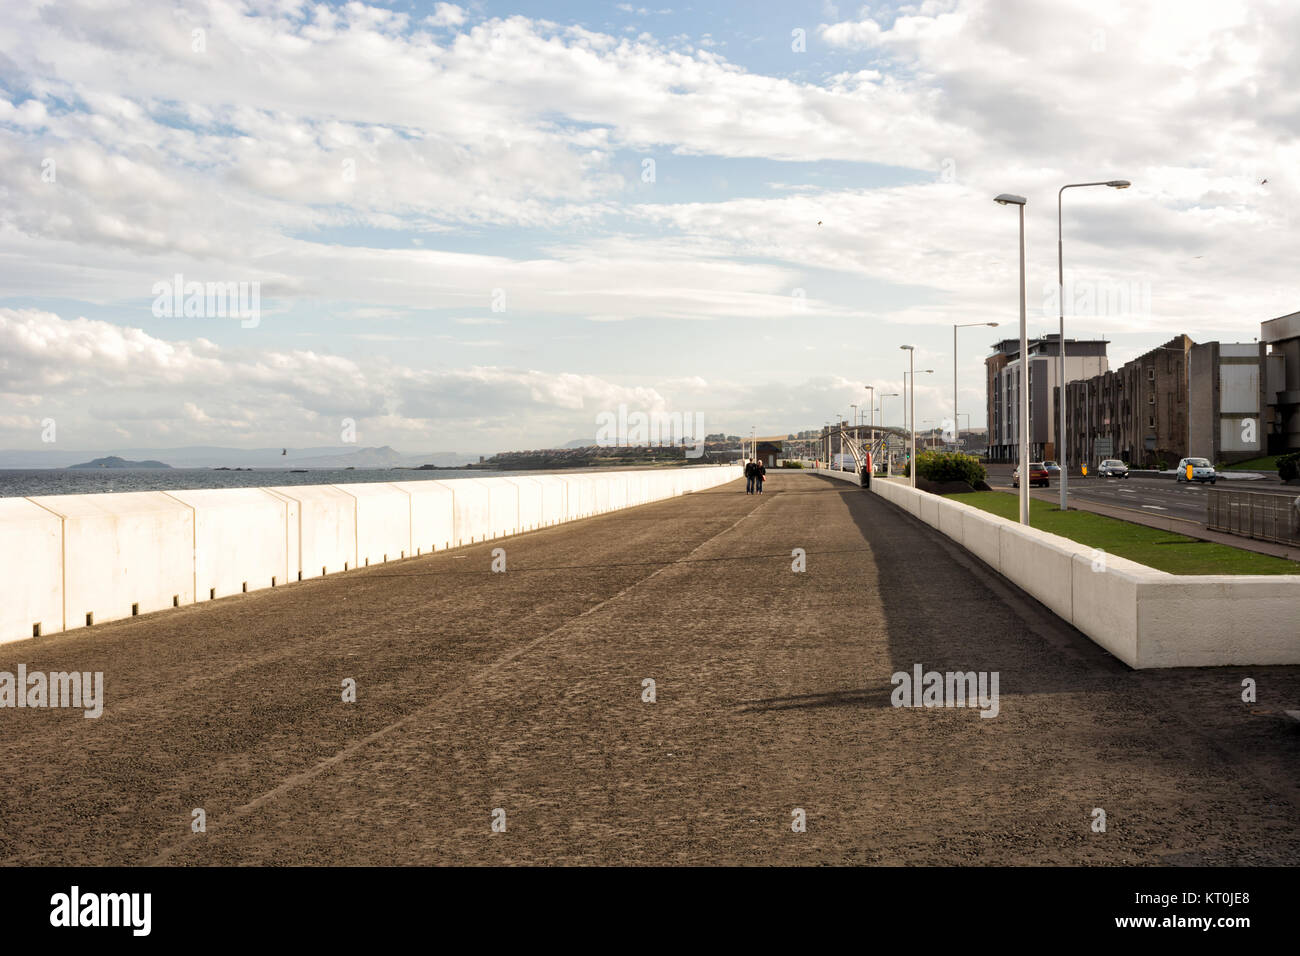 Sea front promenade in the town of Kirkcaldy, Scotland, people walking at a distance Stock Photo